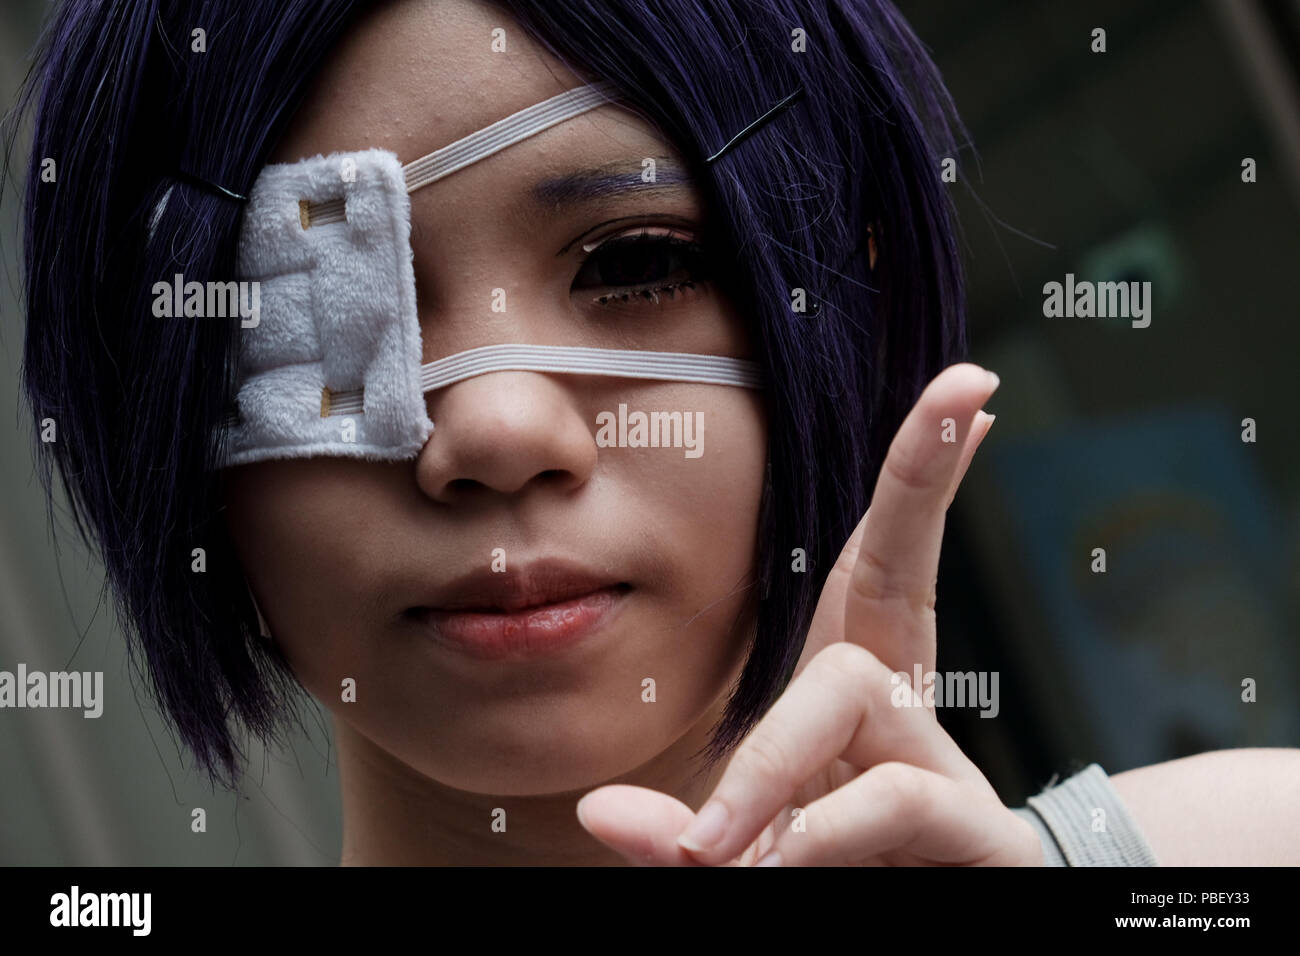 Anime Skin Photographic Prints for Sale